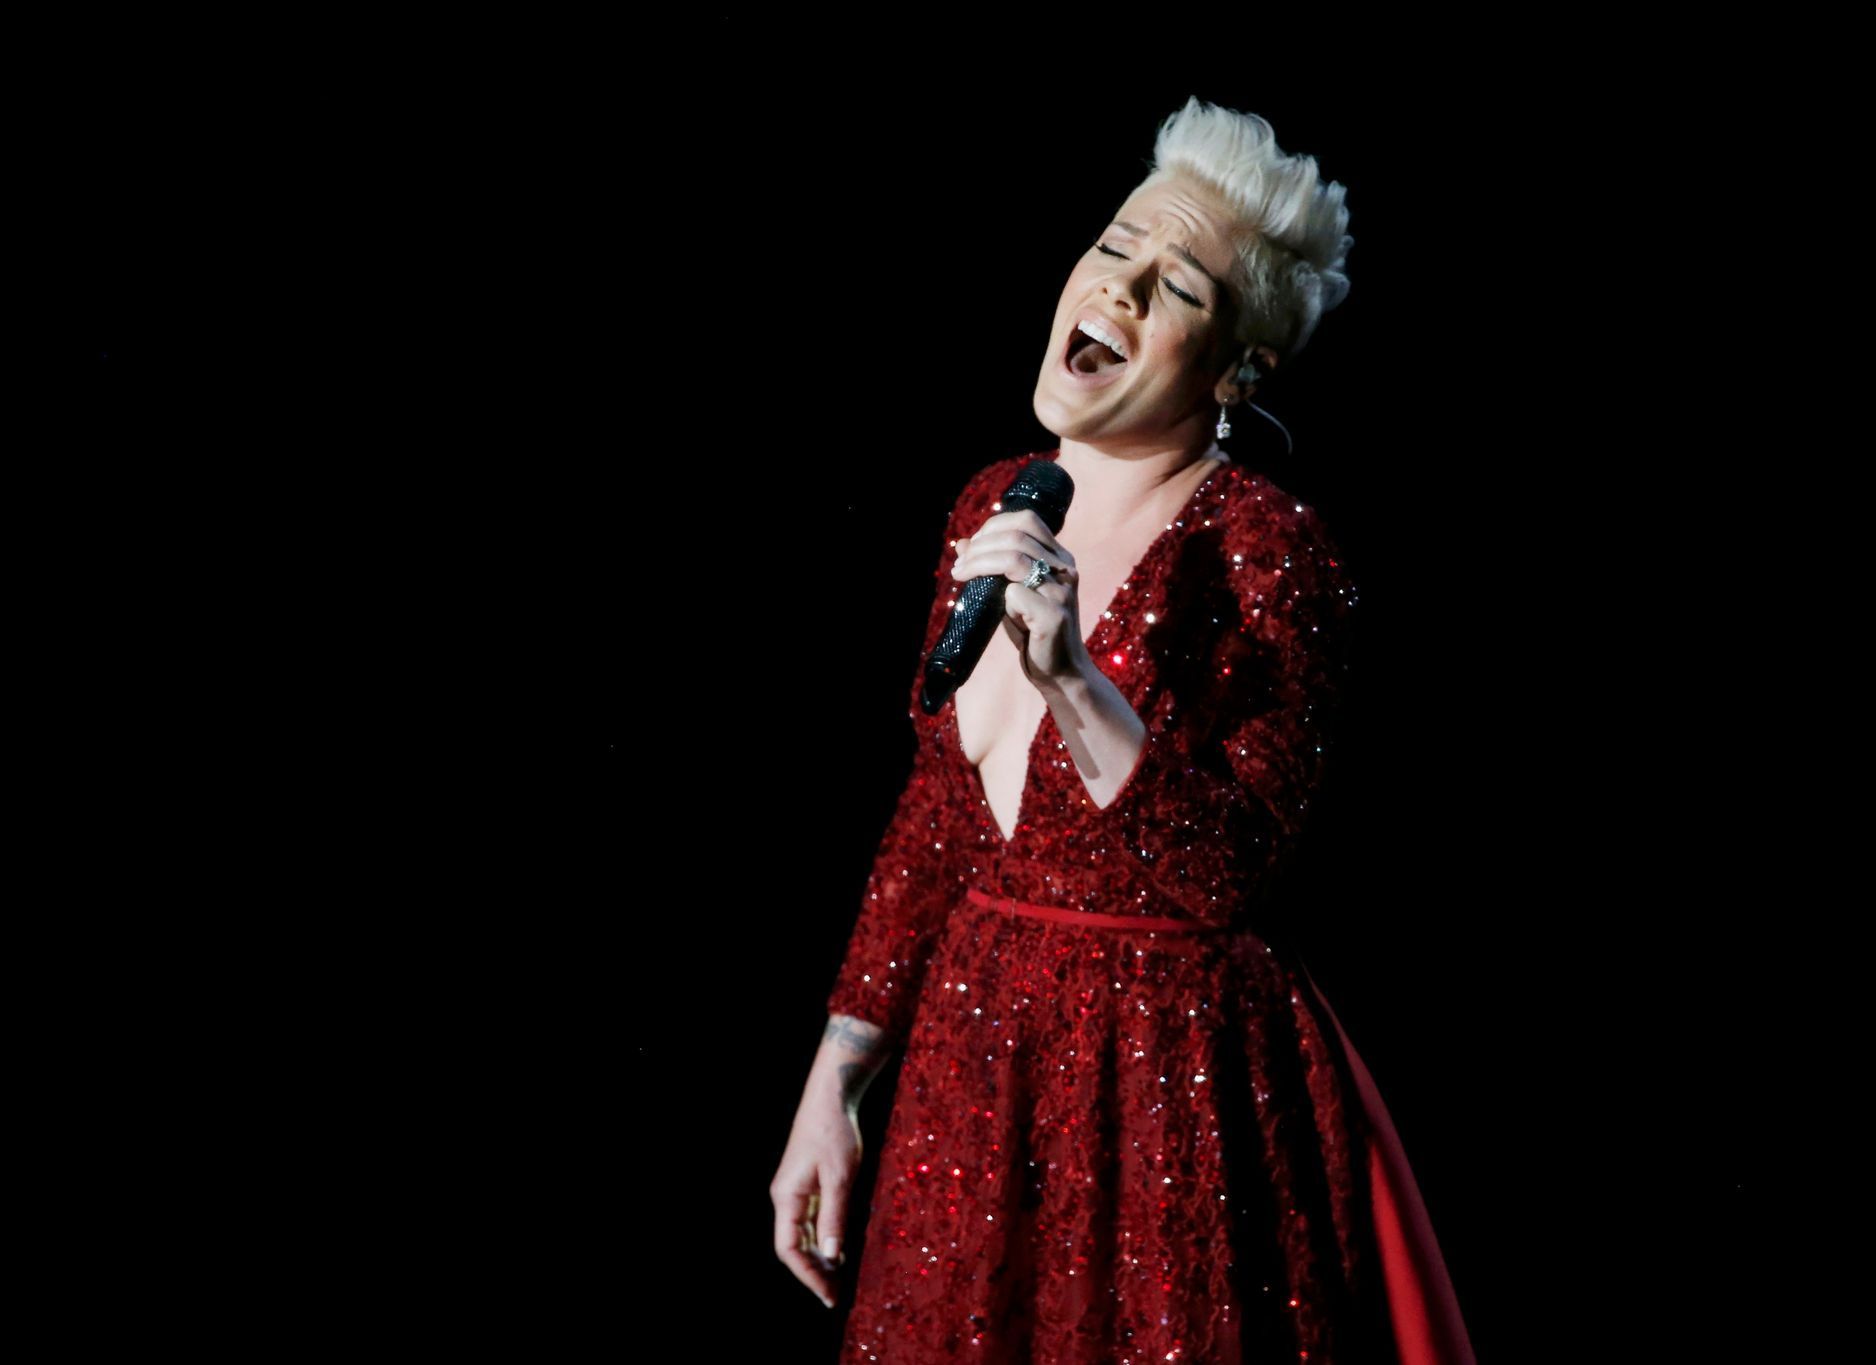 Pink performs a tribute to &quot;The Wizard of Oz&quot; at the 86th Academy Awards in Hollywood